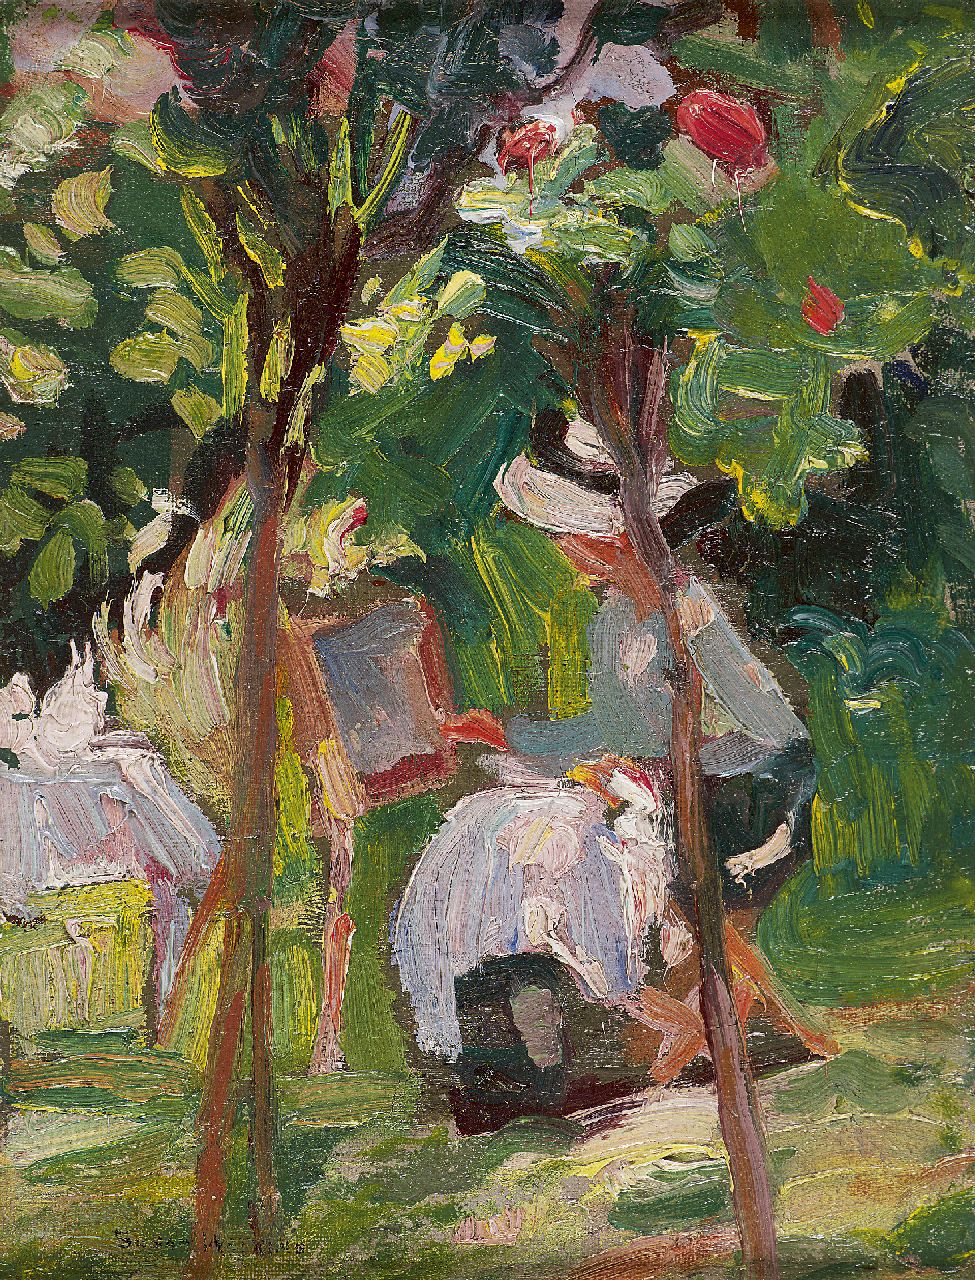 Watkins S.  | Susan Watkins, Painting in the garden, oil on canvas laid down on board 23.1 x 17.9 cm, signed l.l.